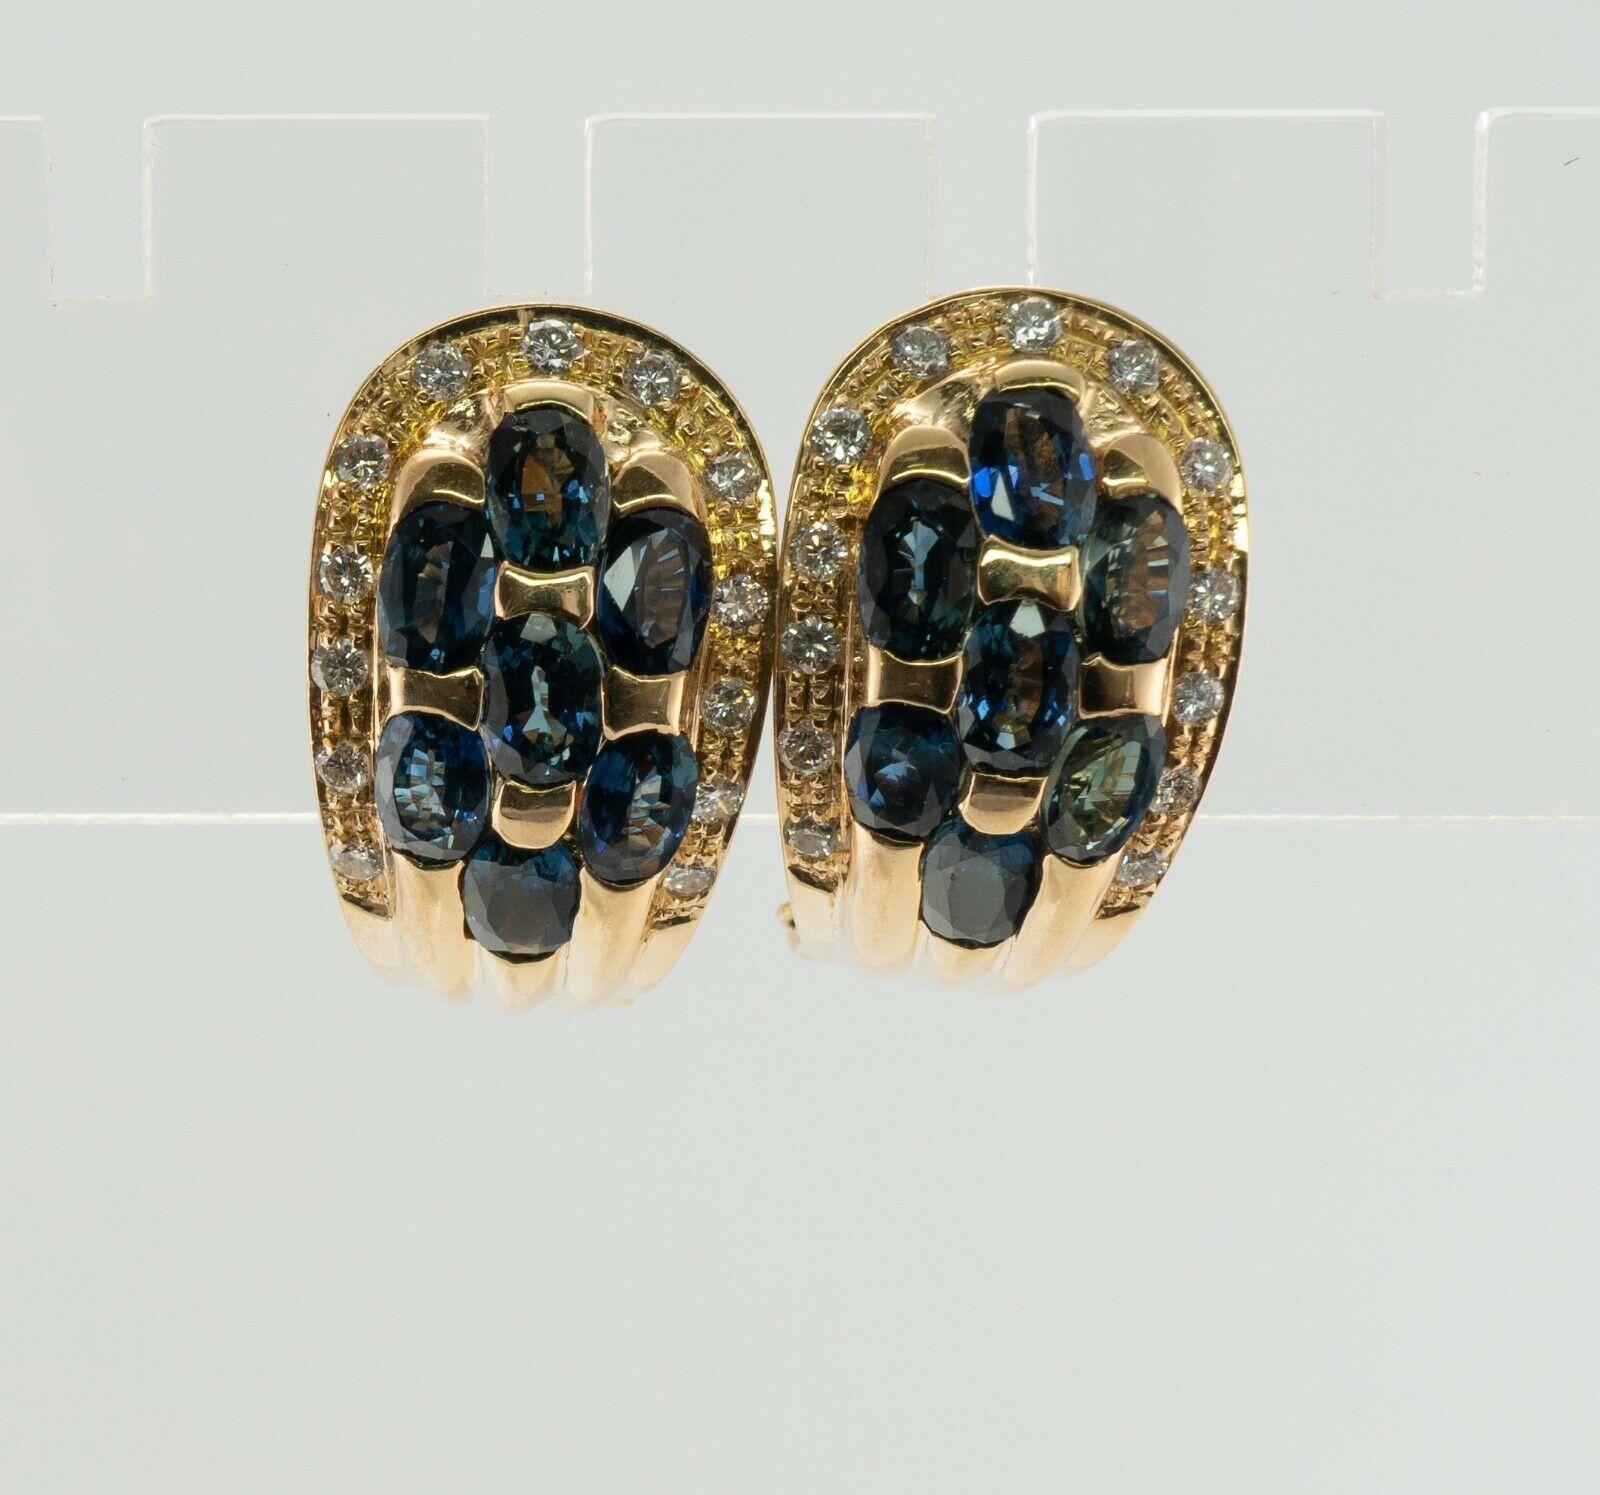 Natural Diamond Sapphire Earrings 18K Gold Omega Backs

These designer earrings are crafted in solid 18K Yellow Gold with 14K Gold posts.
Each earring is set with 7 natural oval cut blue Sapphires = 3.92 carats for the pair.
These sapphires are a